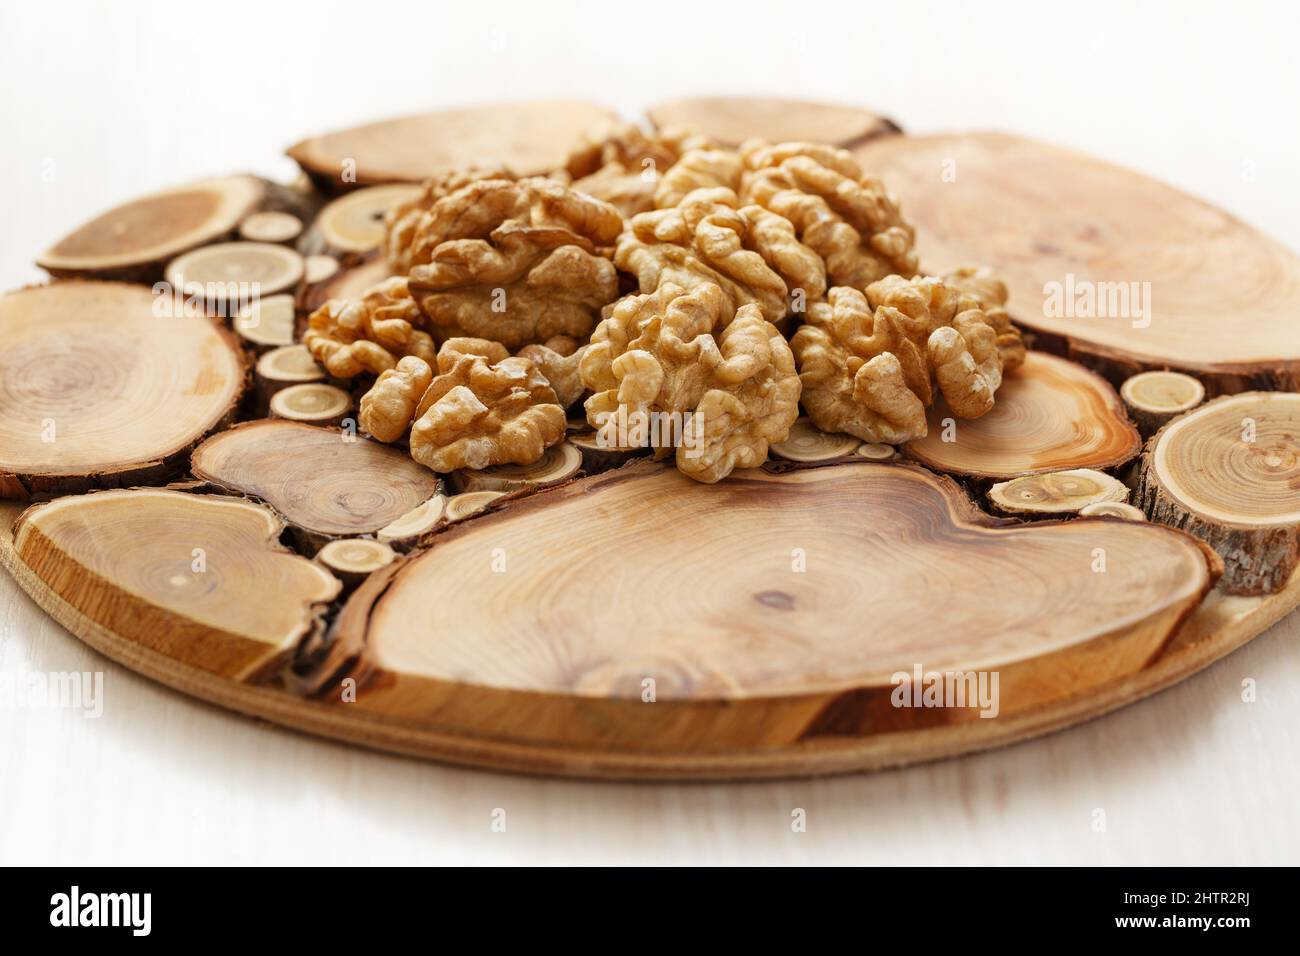 Peeled halves of walnuts on a tray made from slices of tree trunks. Close up Stock Photo